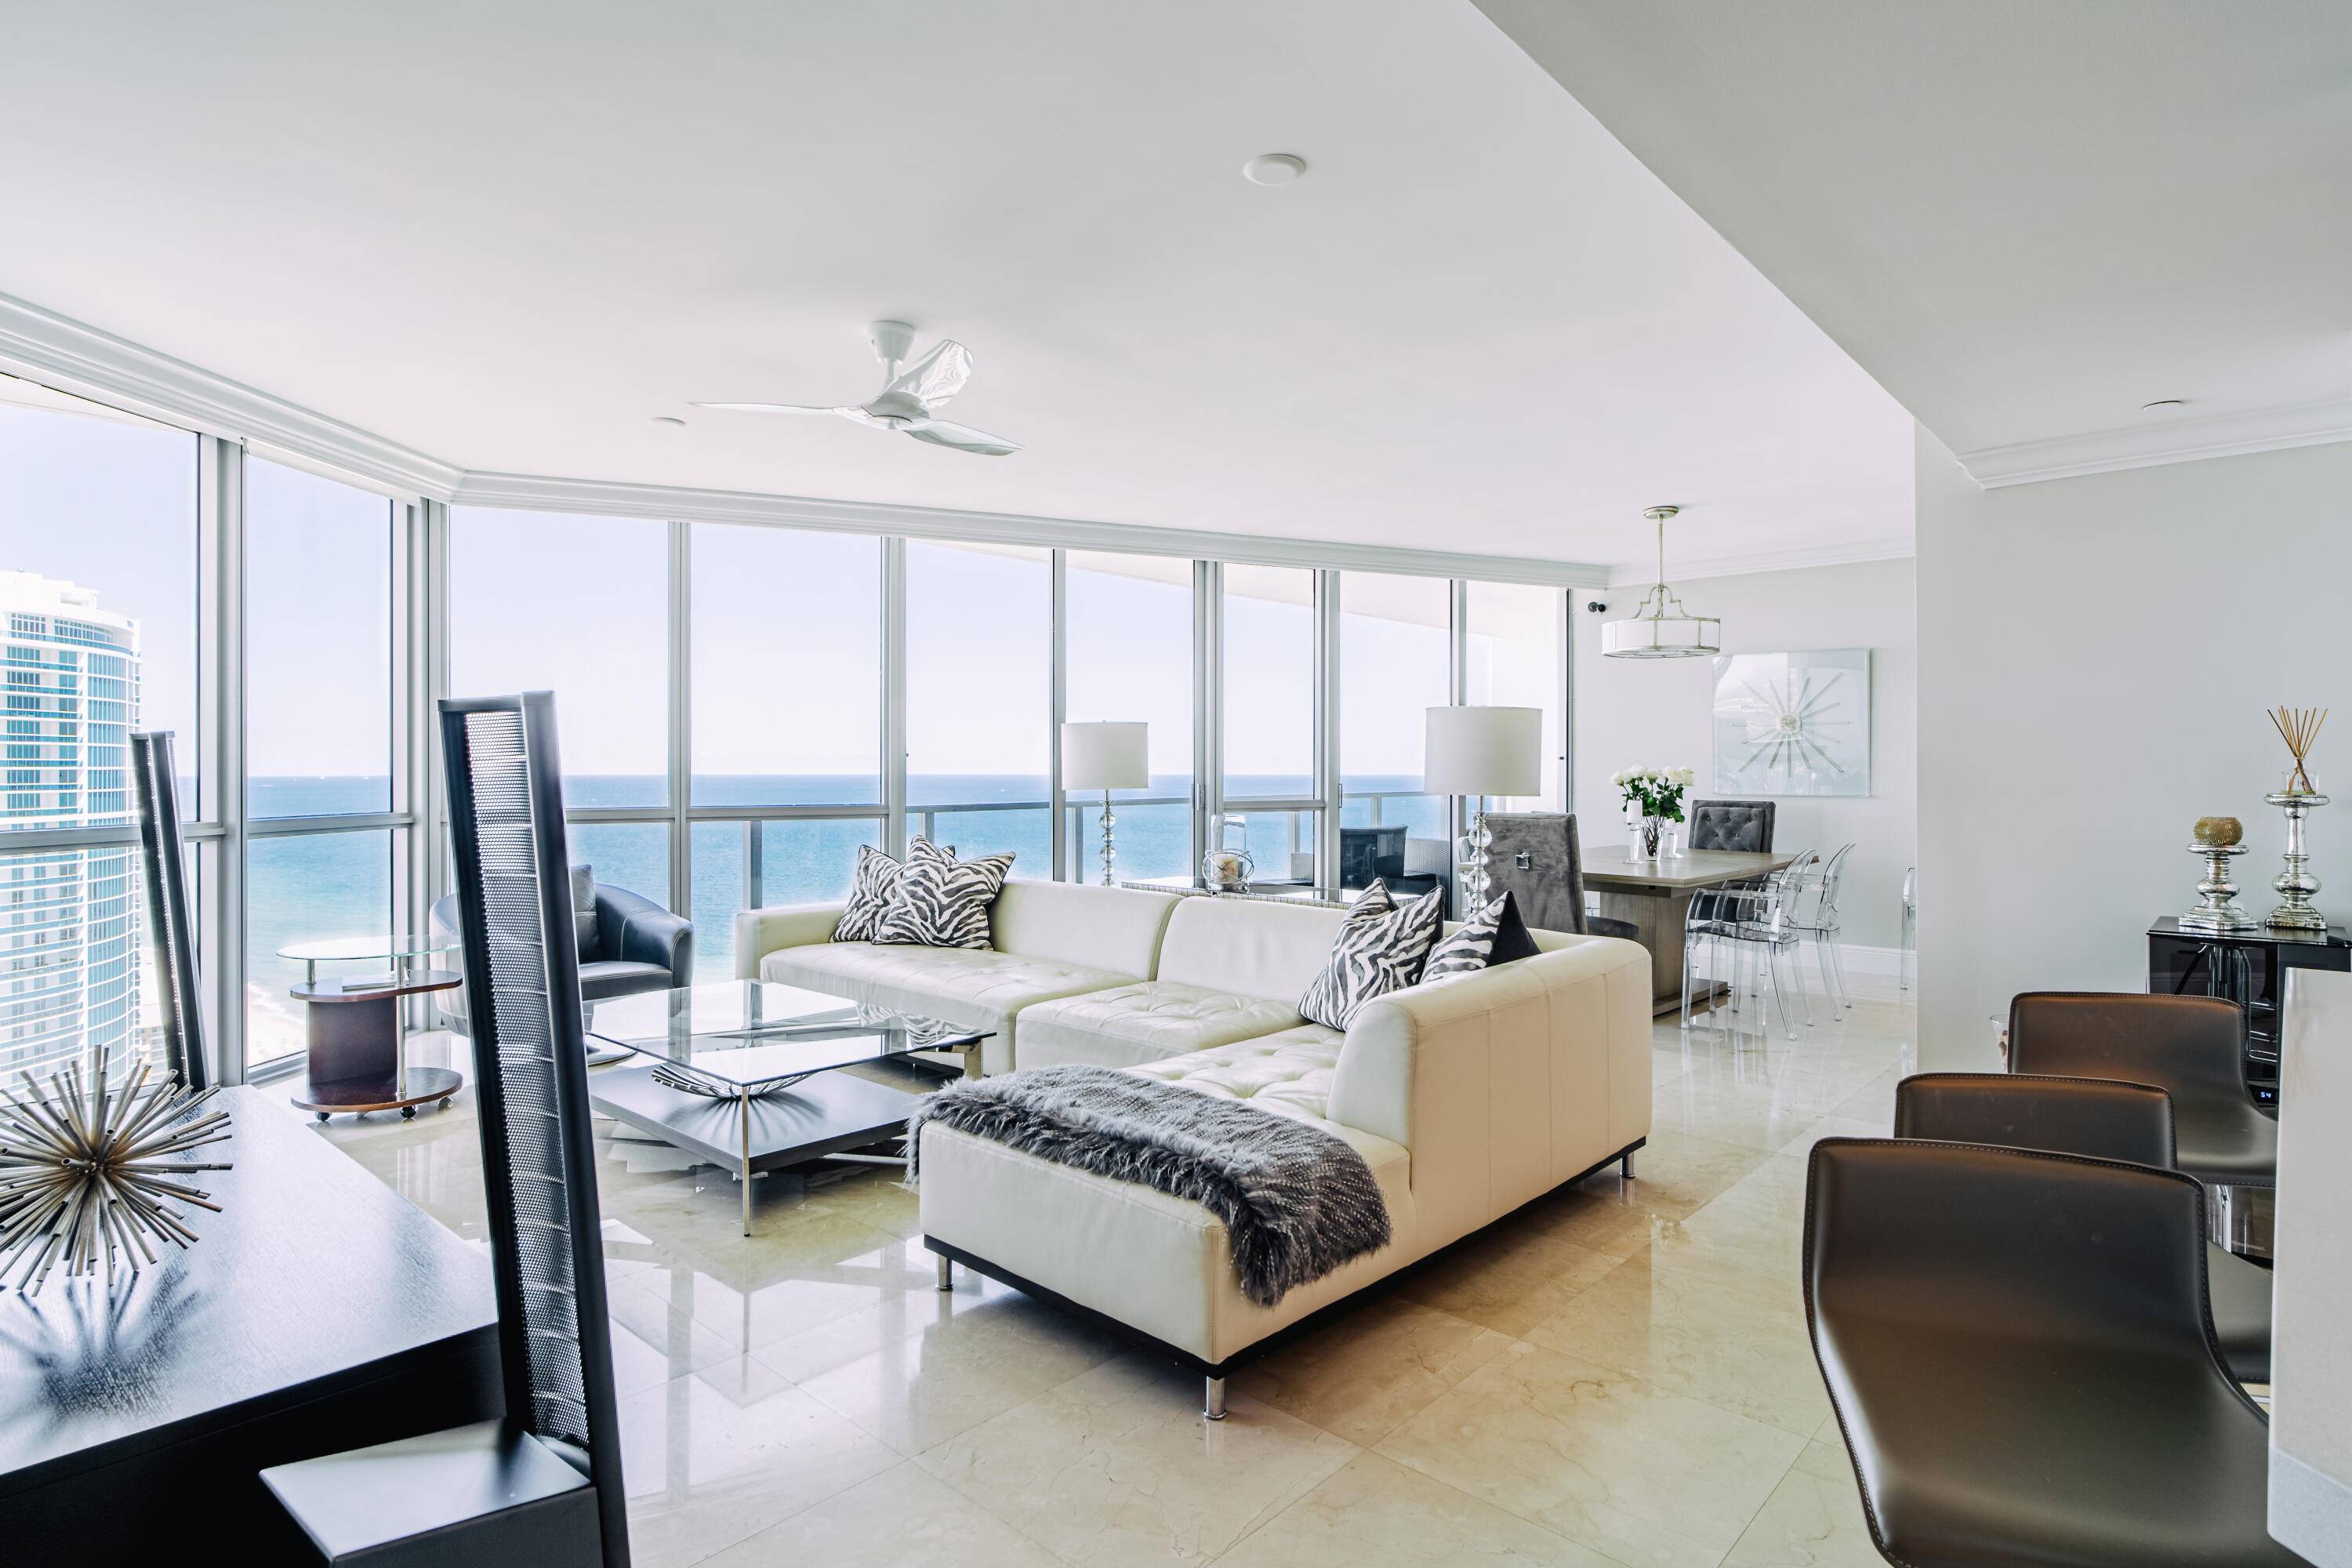 Breathtaking Ocean and Intracoastal views in this fully remodeled luxurious 3 bed 3 bath Penthouse Condo in the 5 Star highly sought after Ocean Palms building.